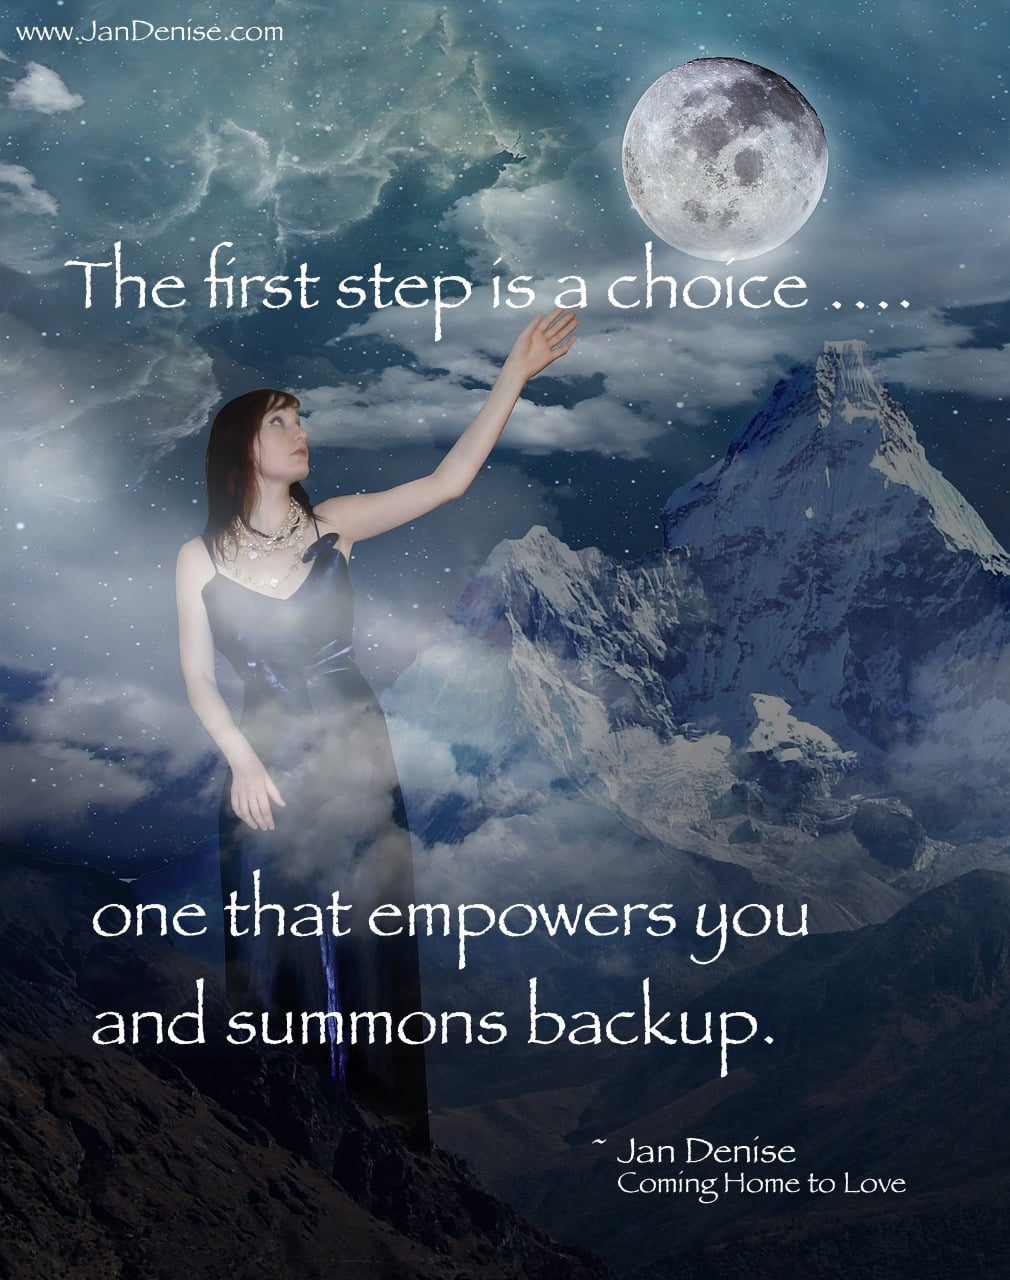 The first step IS to choose what you know to be right …